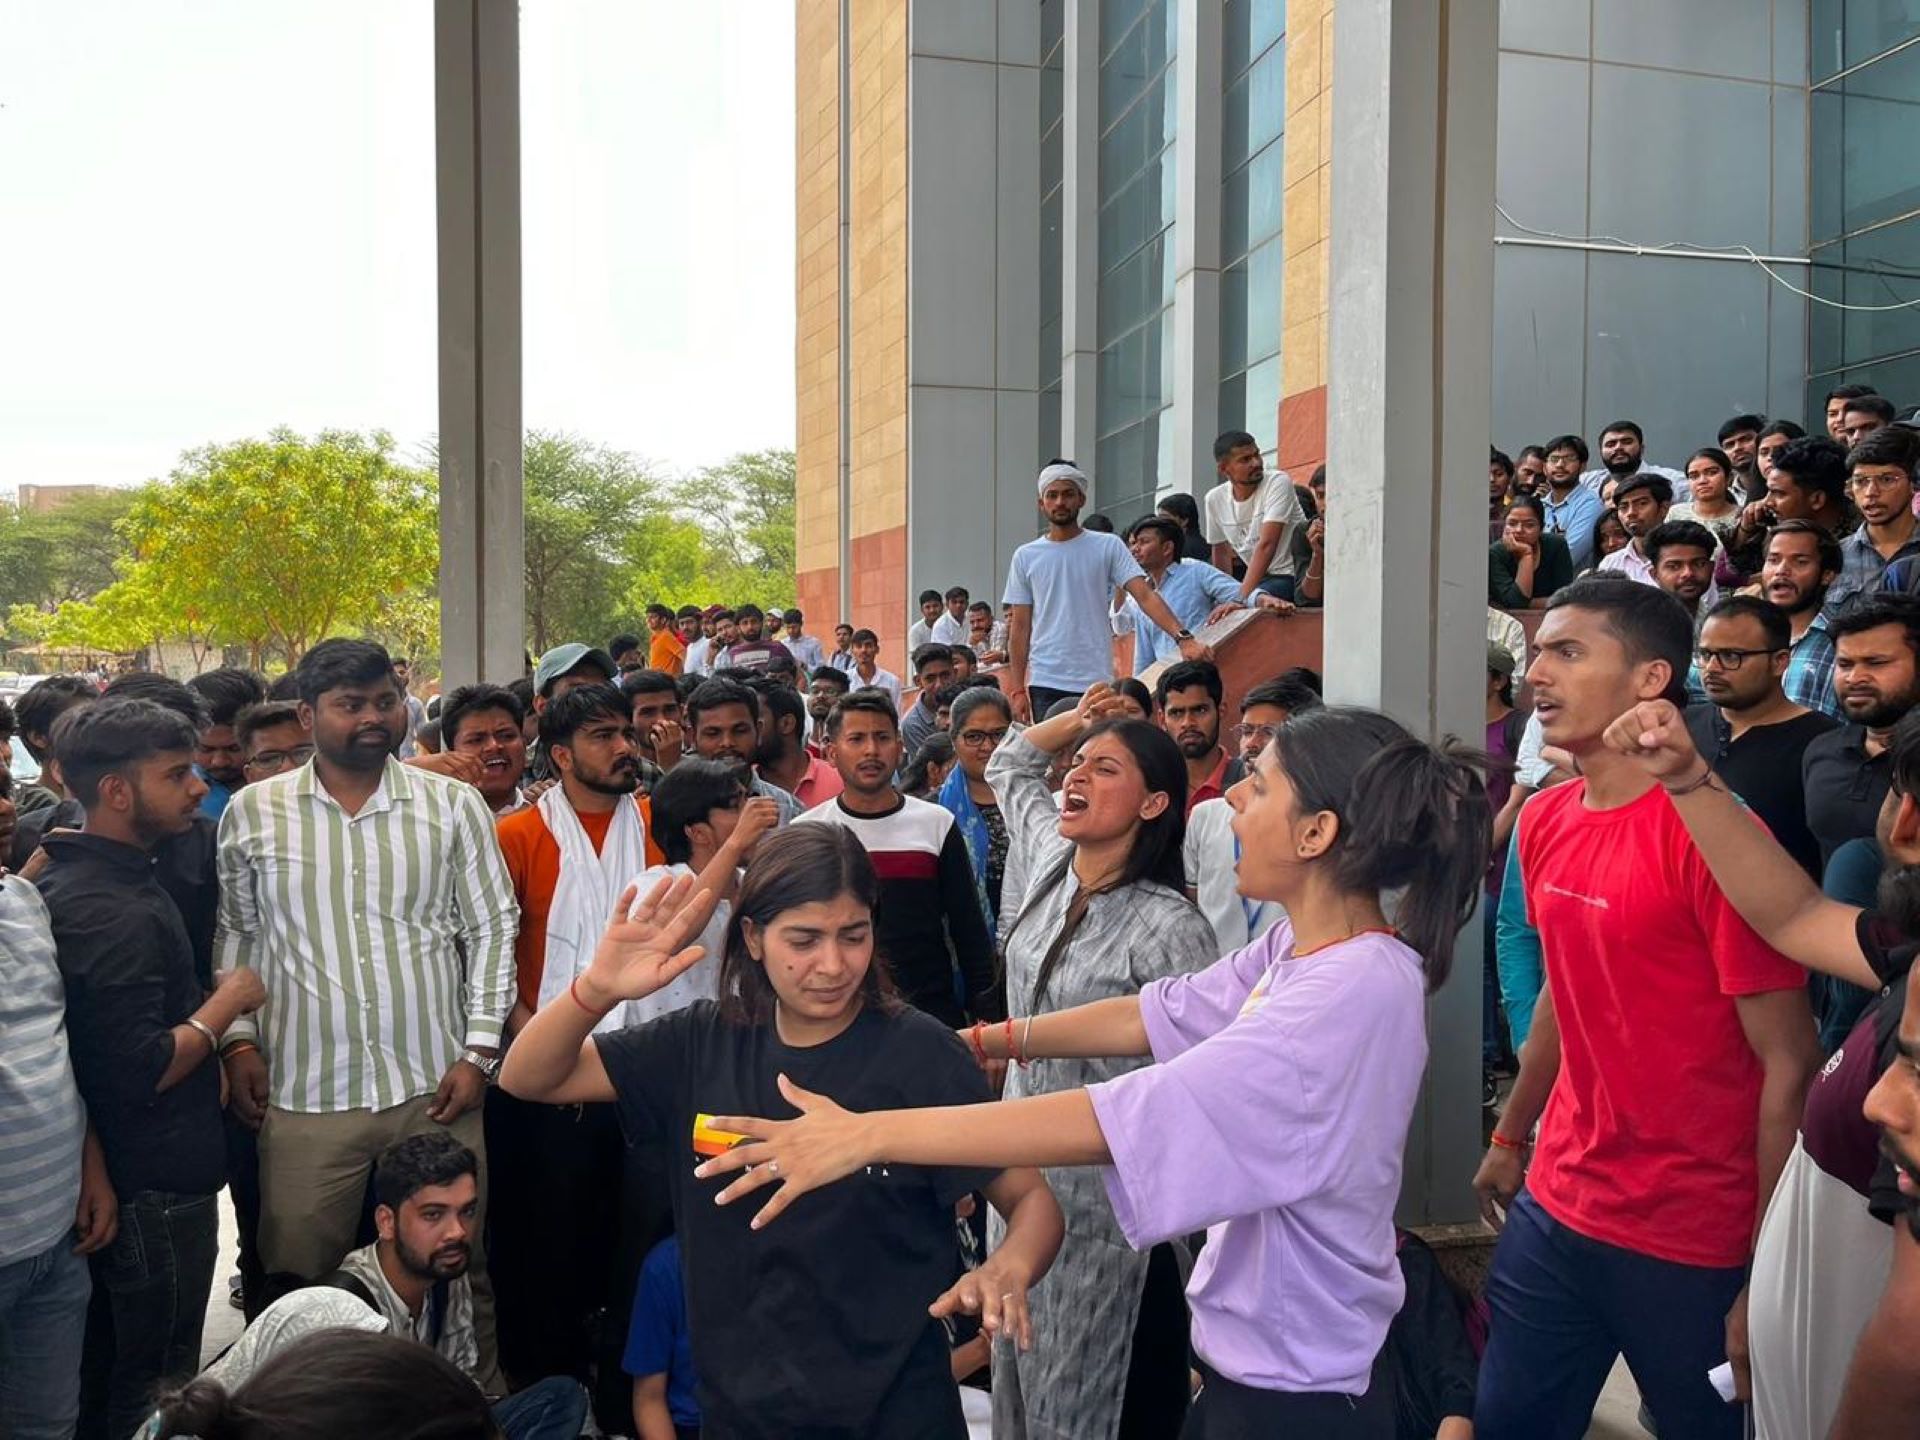 Chaos Erupts at Central University of Haryana: Students Demand Justice and Tighter Security